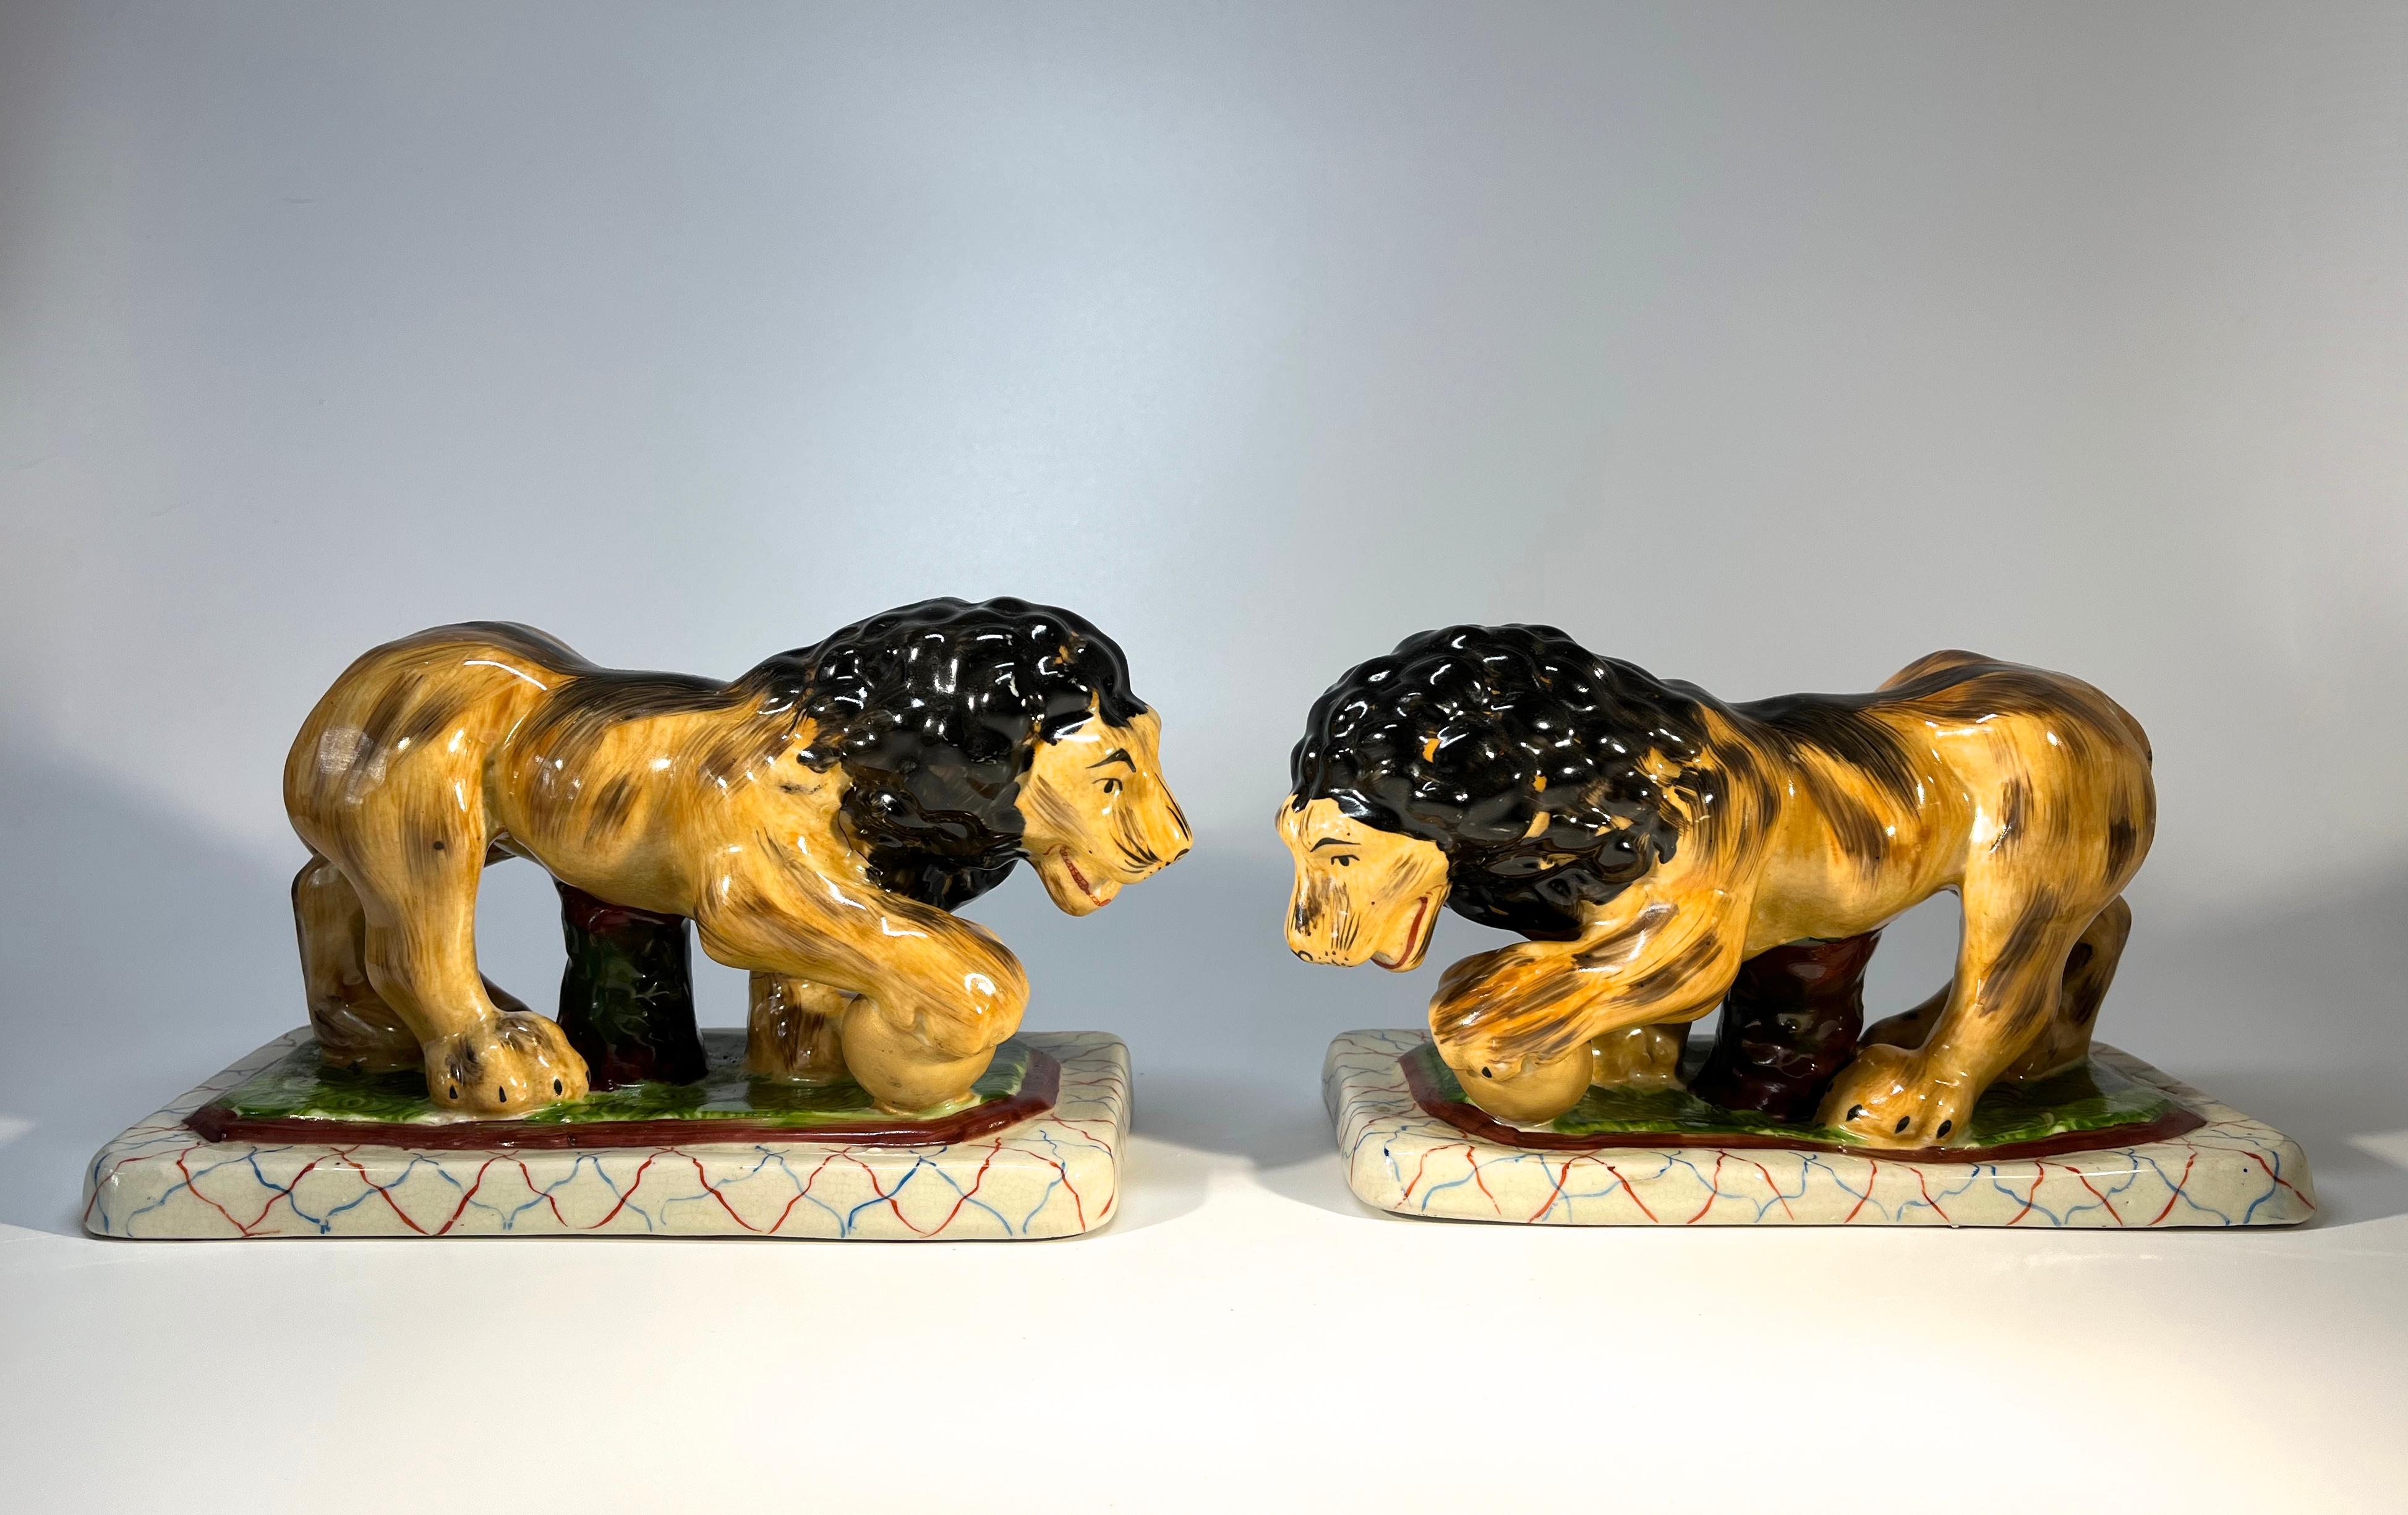 An impressive pair of Medici Lions fashioned after the style of Staffordshire Pottery of the late 1800's
Capable of making a splendid decorative statement
Circa 1960's
Height 4.75 inch, Width 8 inch, Depth 4 inch
In very good condition
Wear